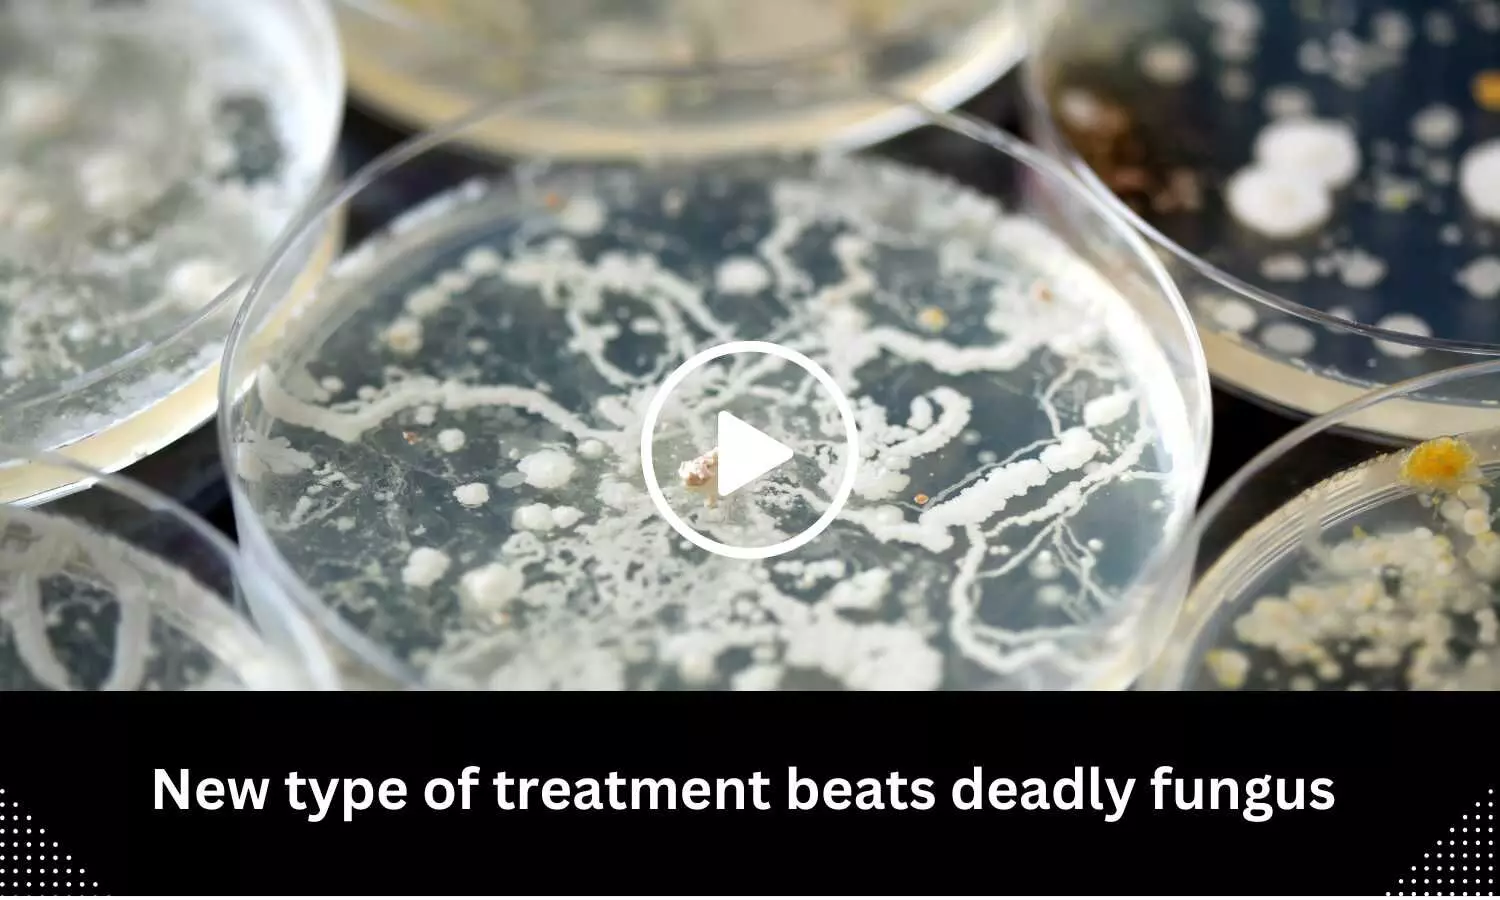 New type of treatment beats deadly fungus